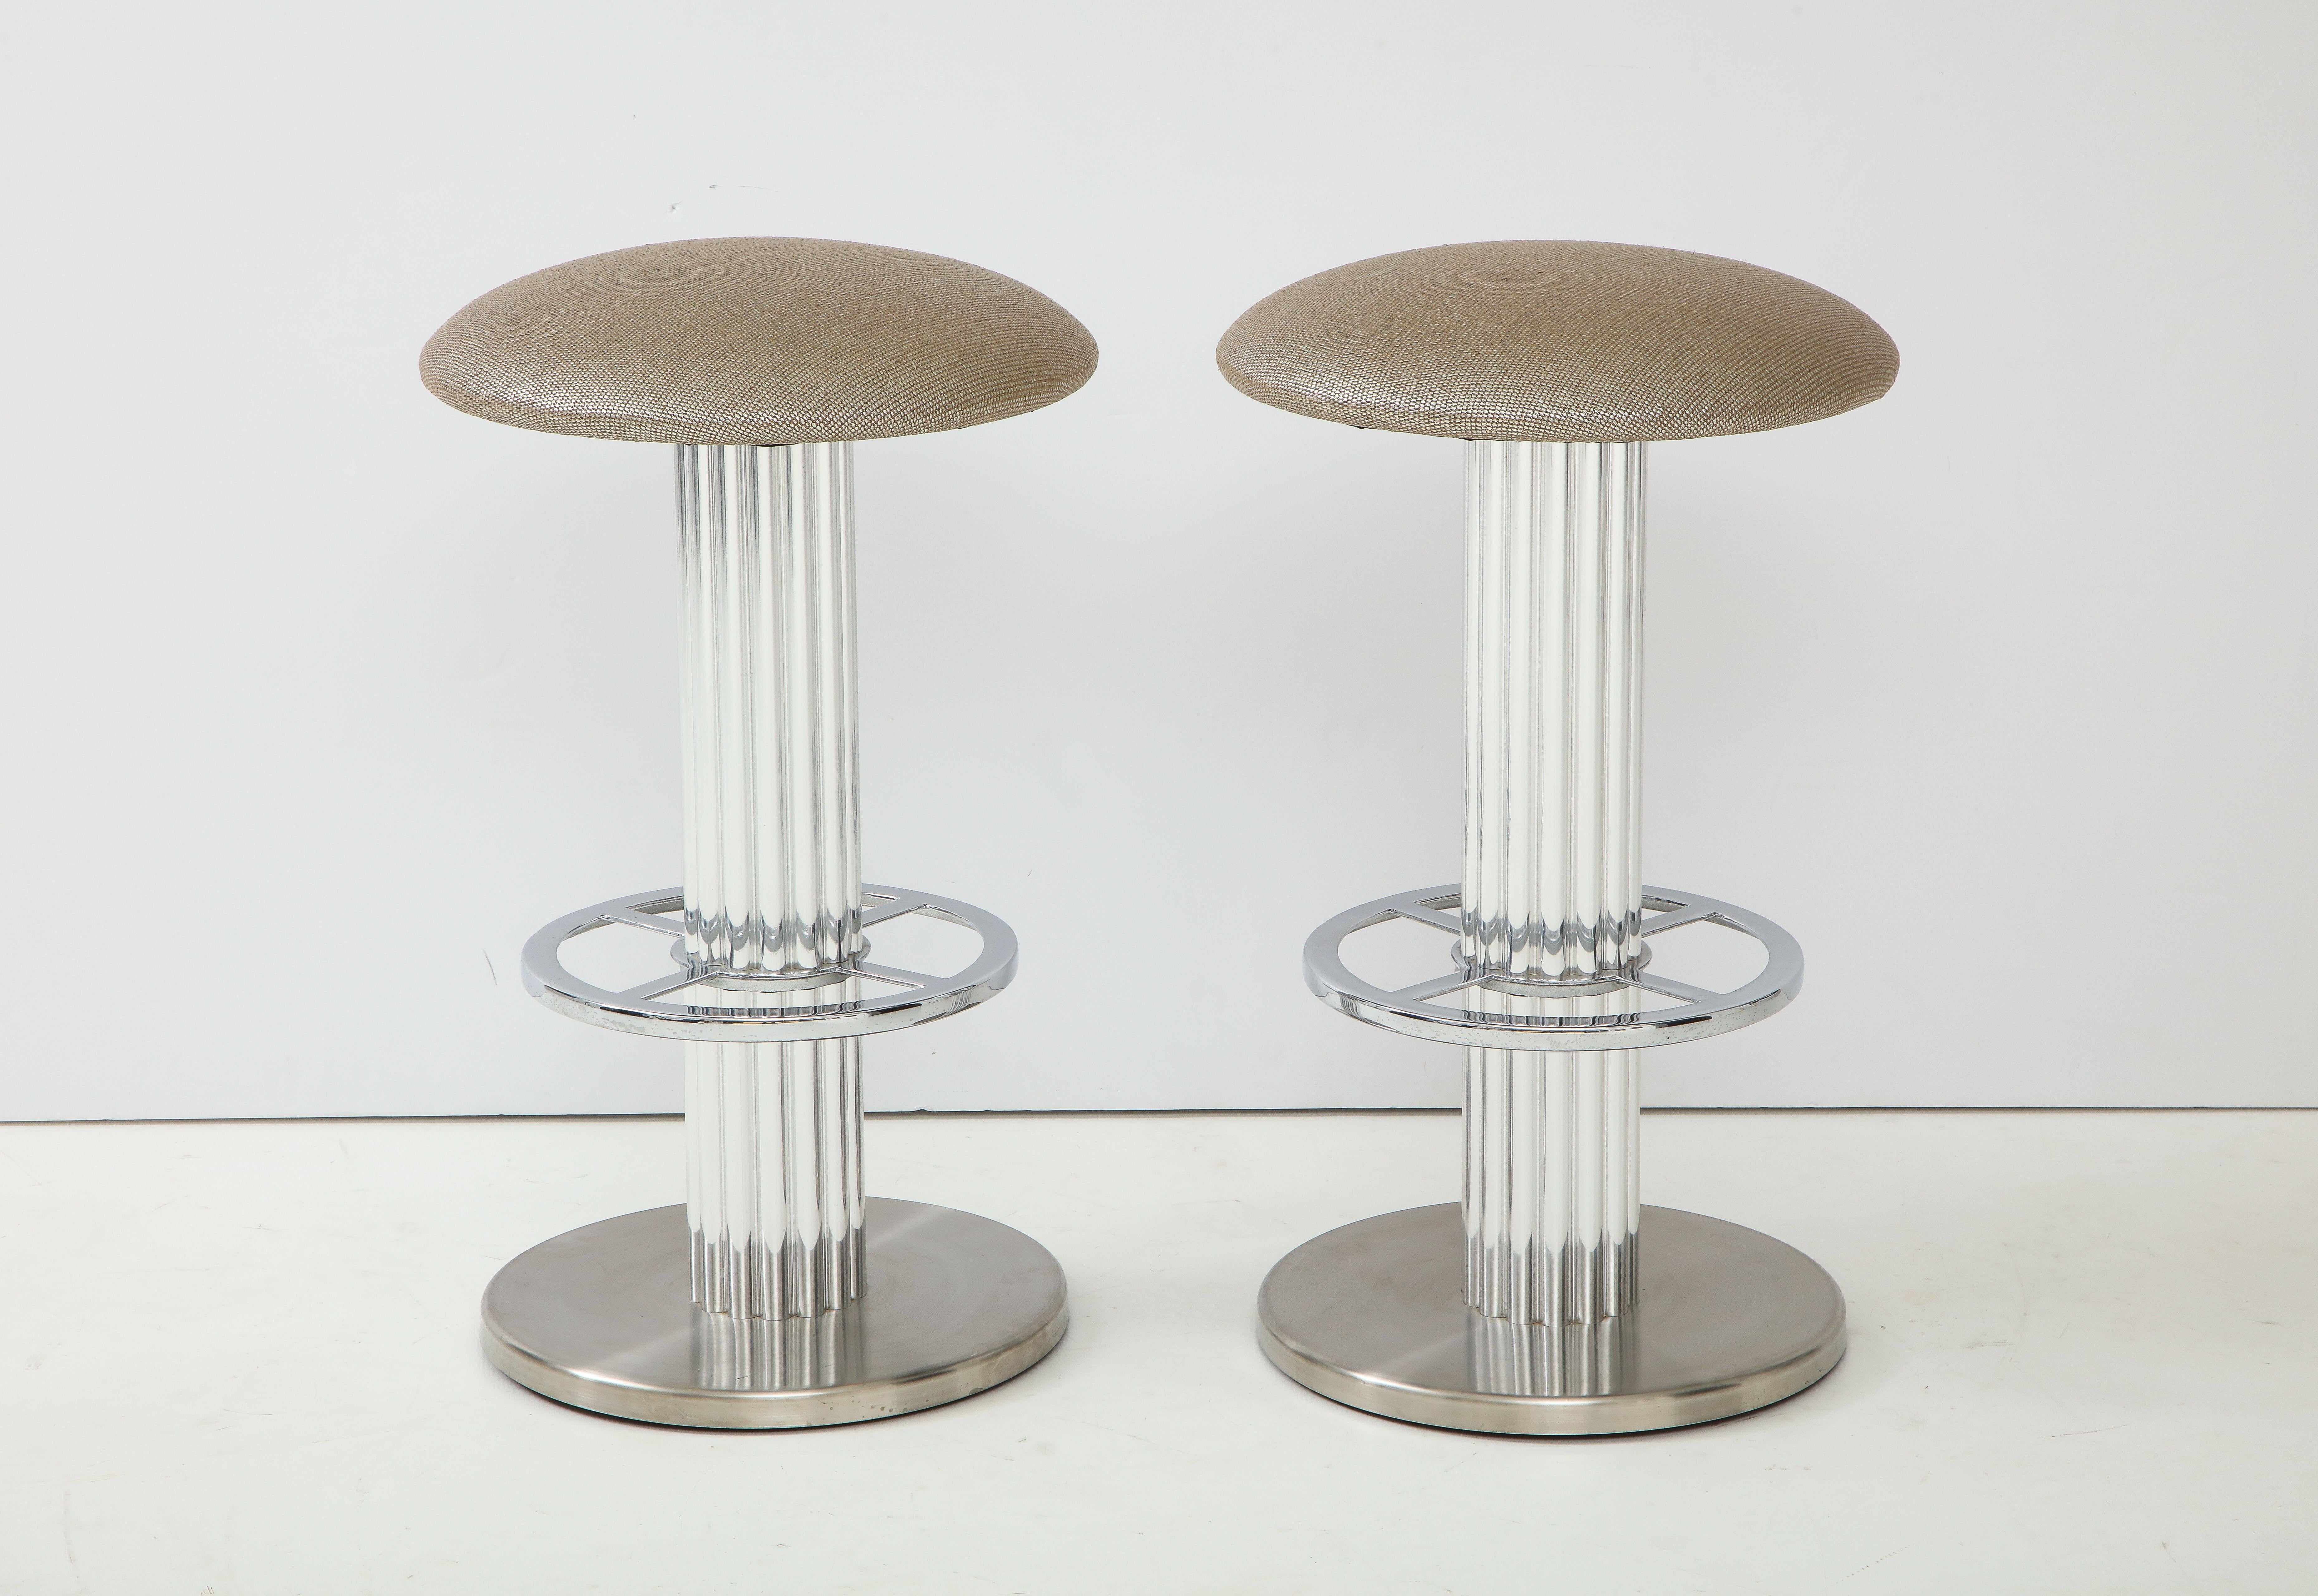 Pair of bar stools in polished and brushed chrome over steel frames.
The seats have been newly reupholstered in a luxurious ROMO metallic fabric.